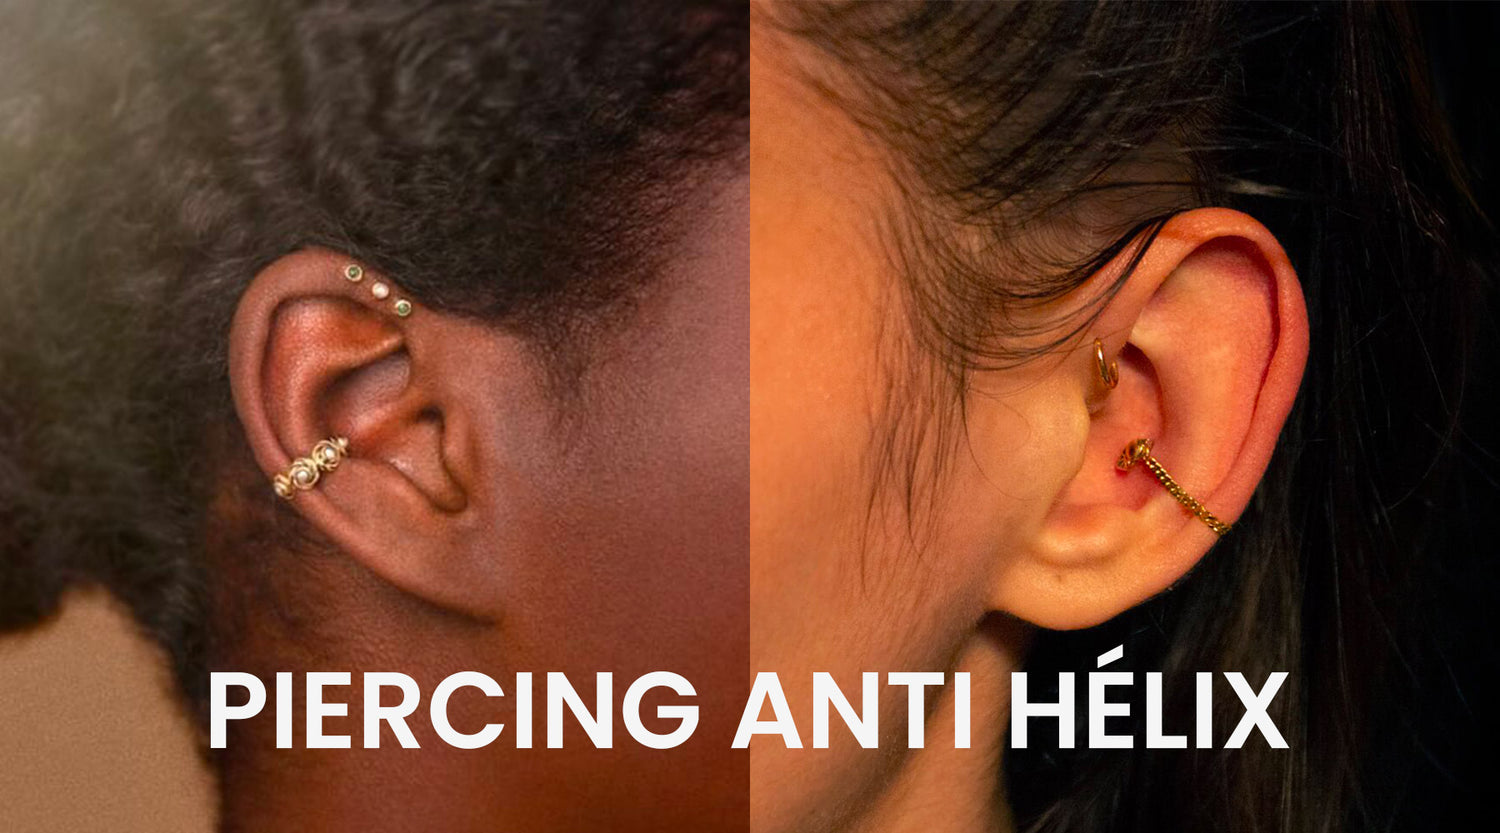 Our Guide for Helix Piercings - Essential Beauty & Piercing